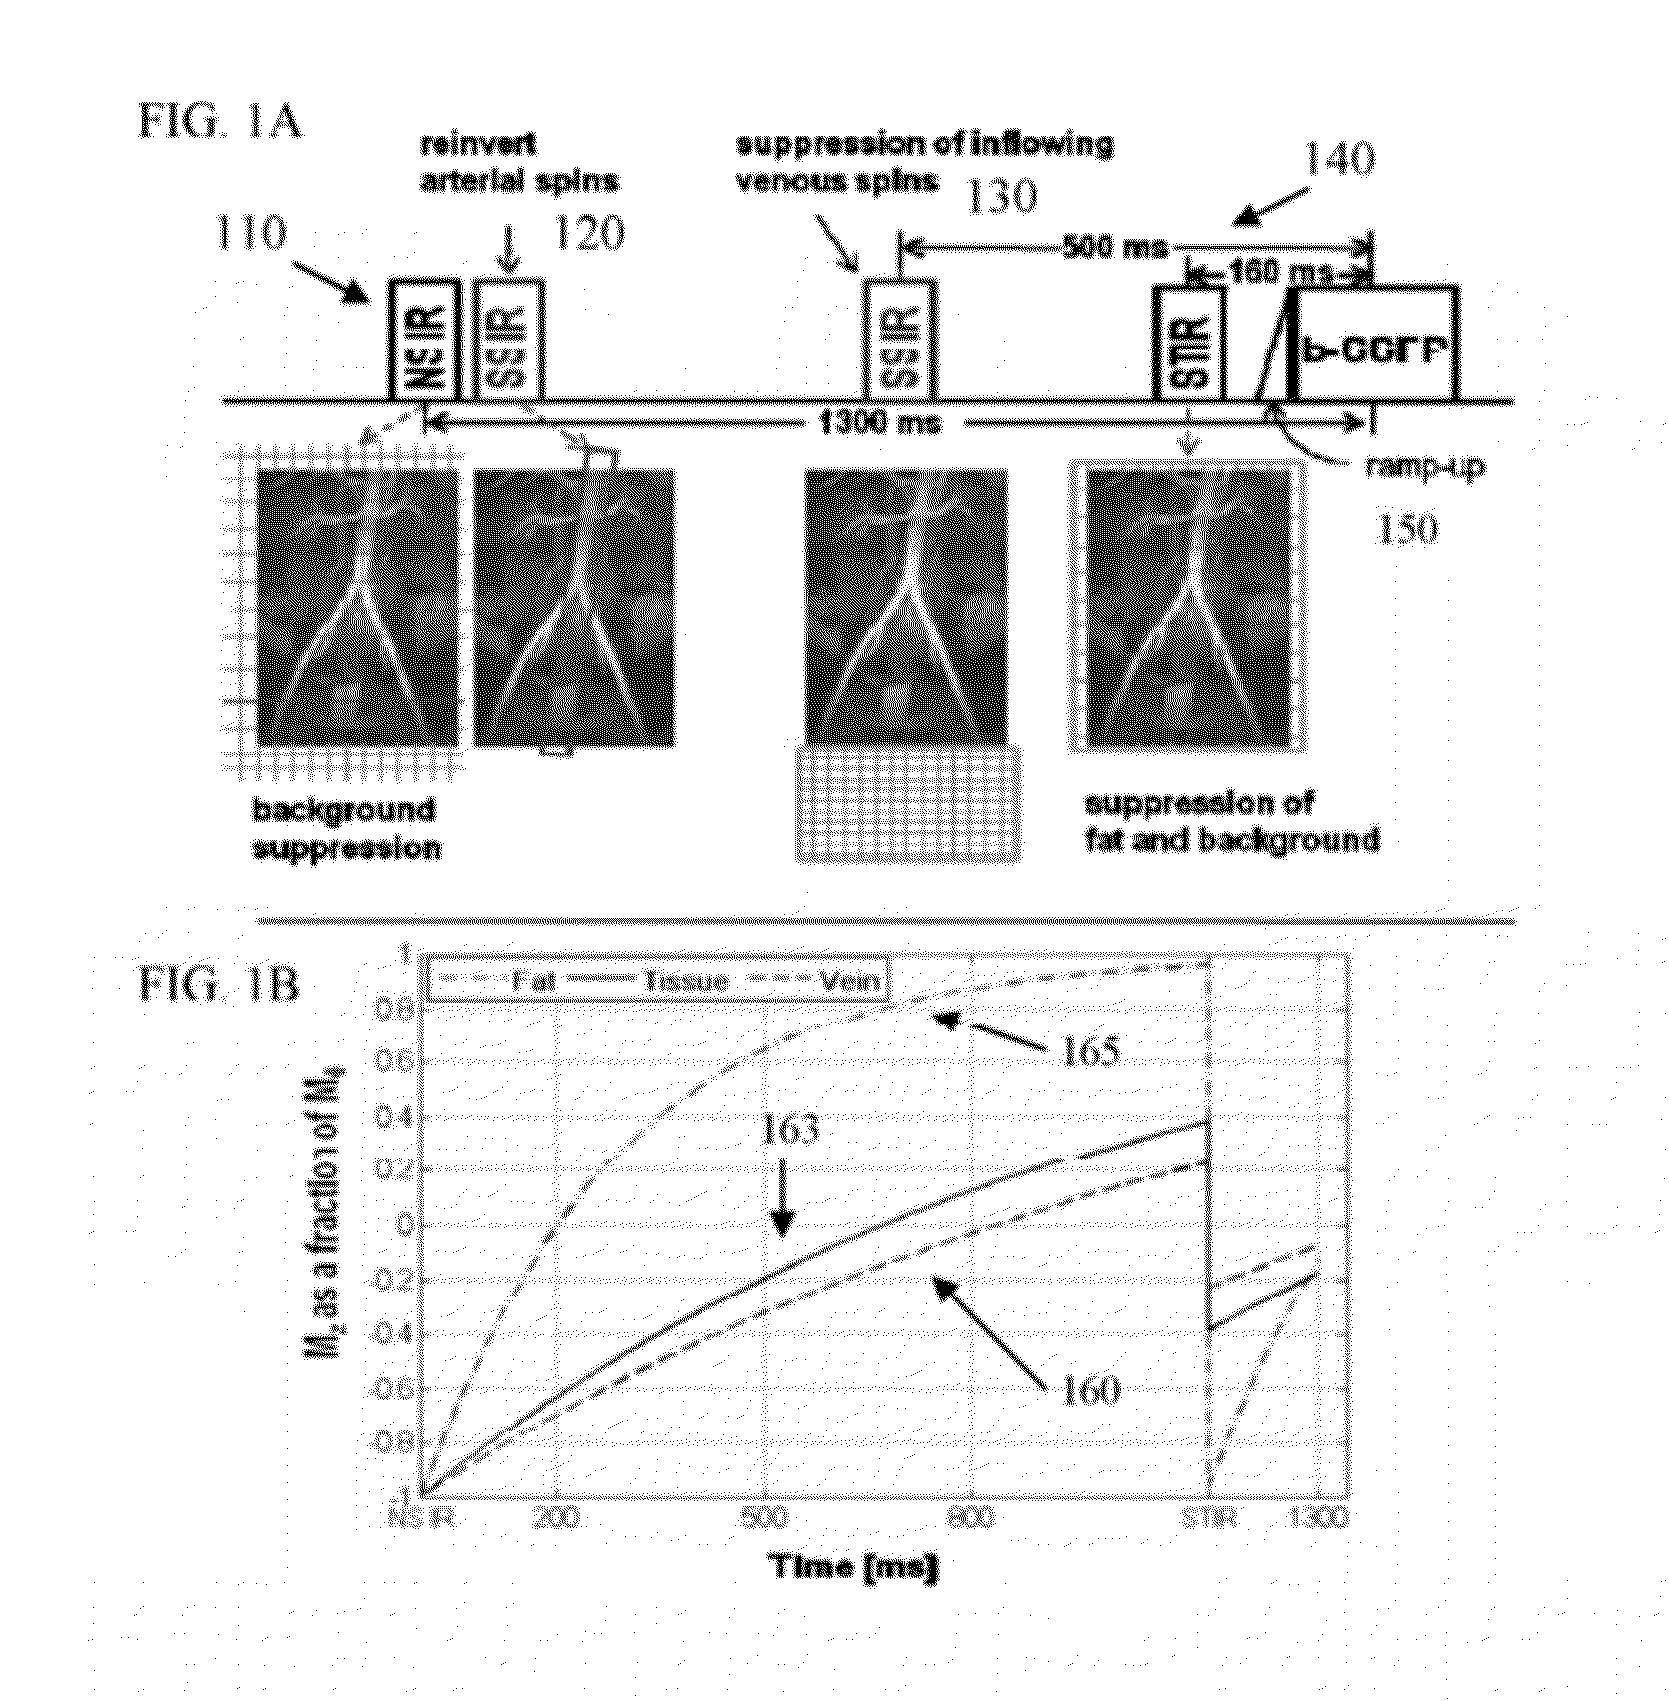 Apparatus and Method of Non-Contrast Magnetic Resonance Angiography of Abdominal and Pelvic Arteries